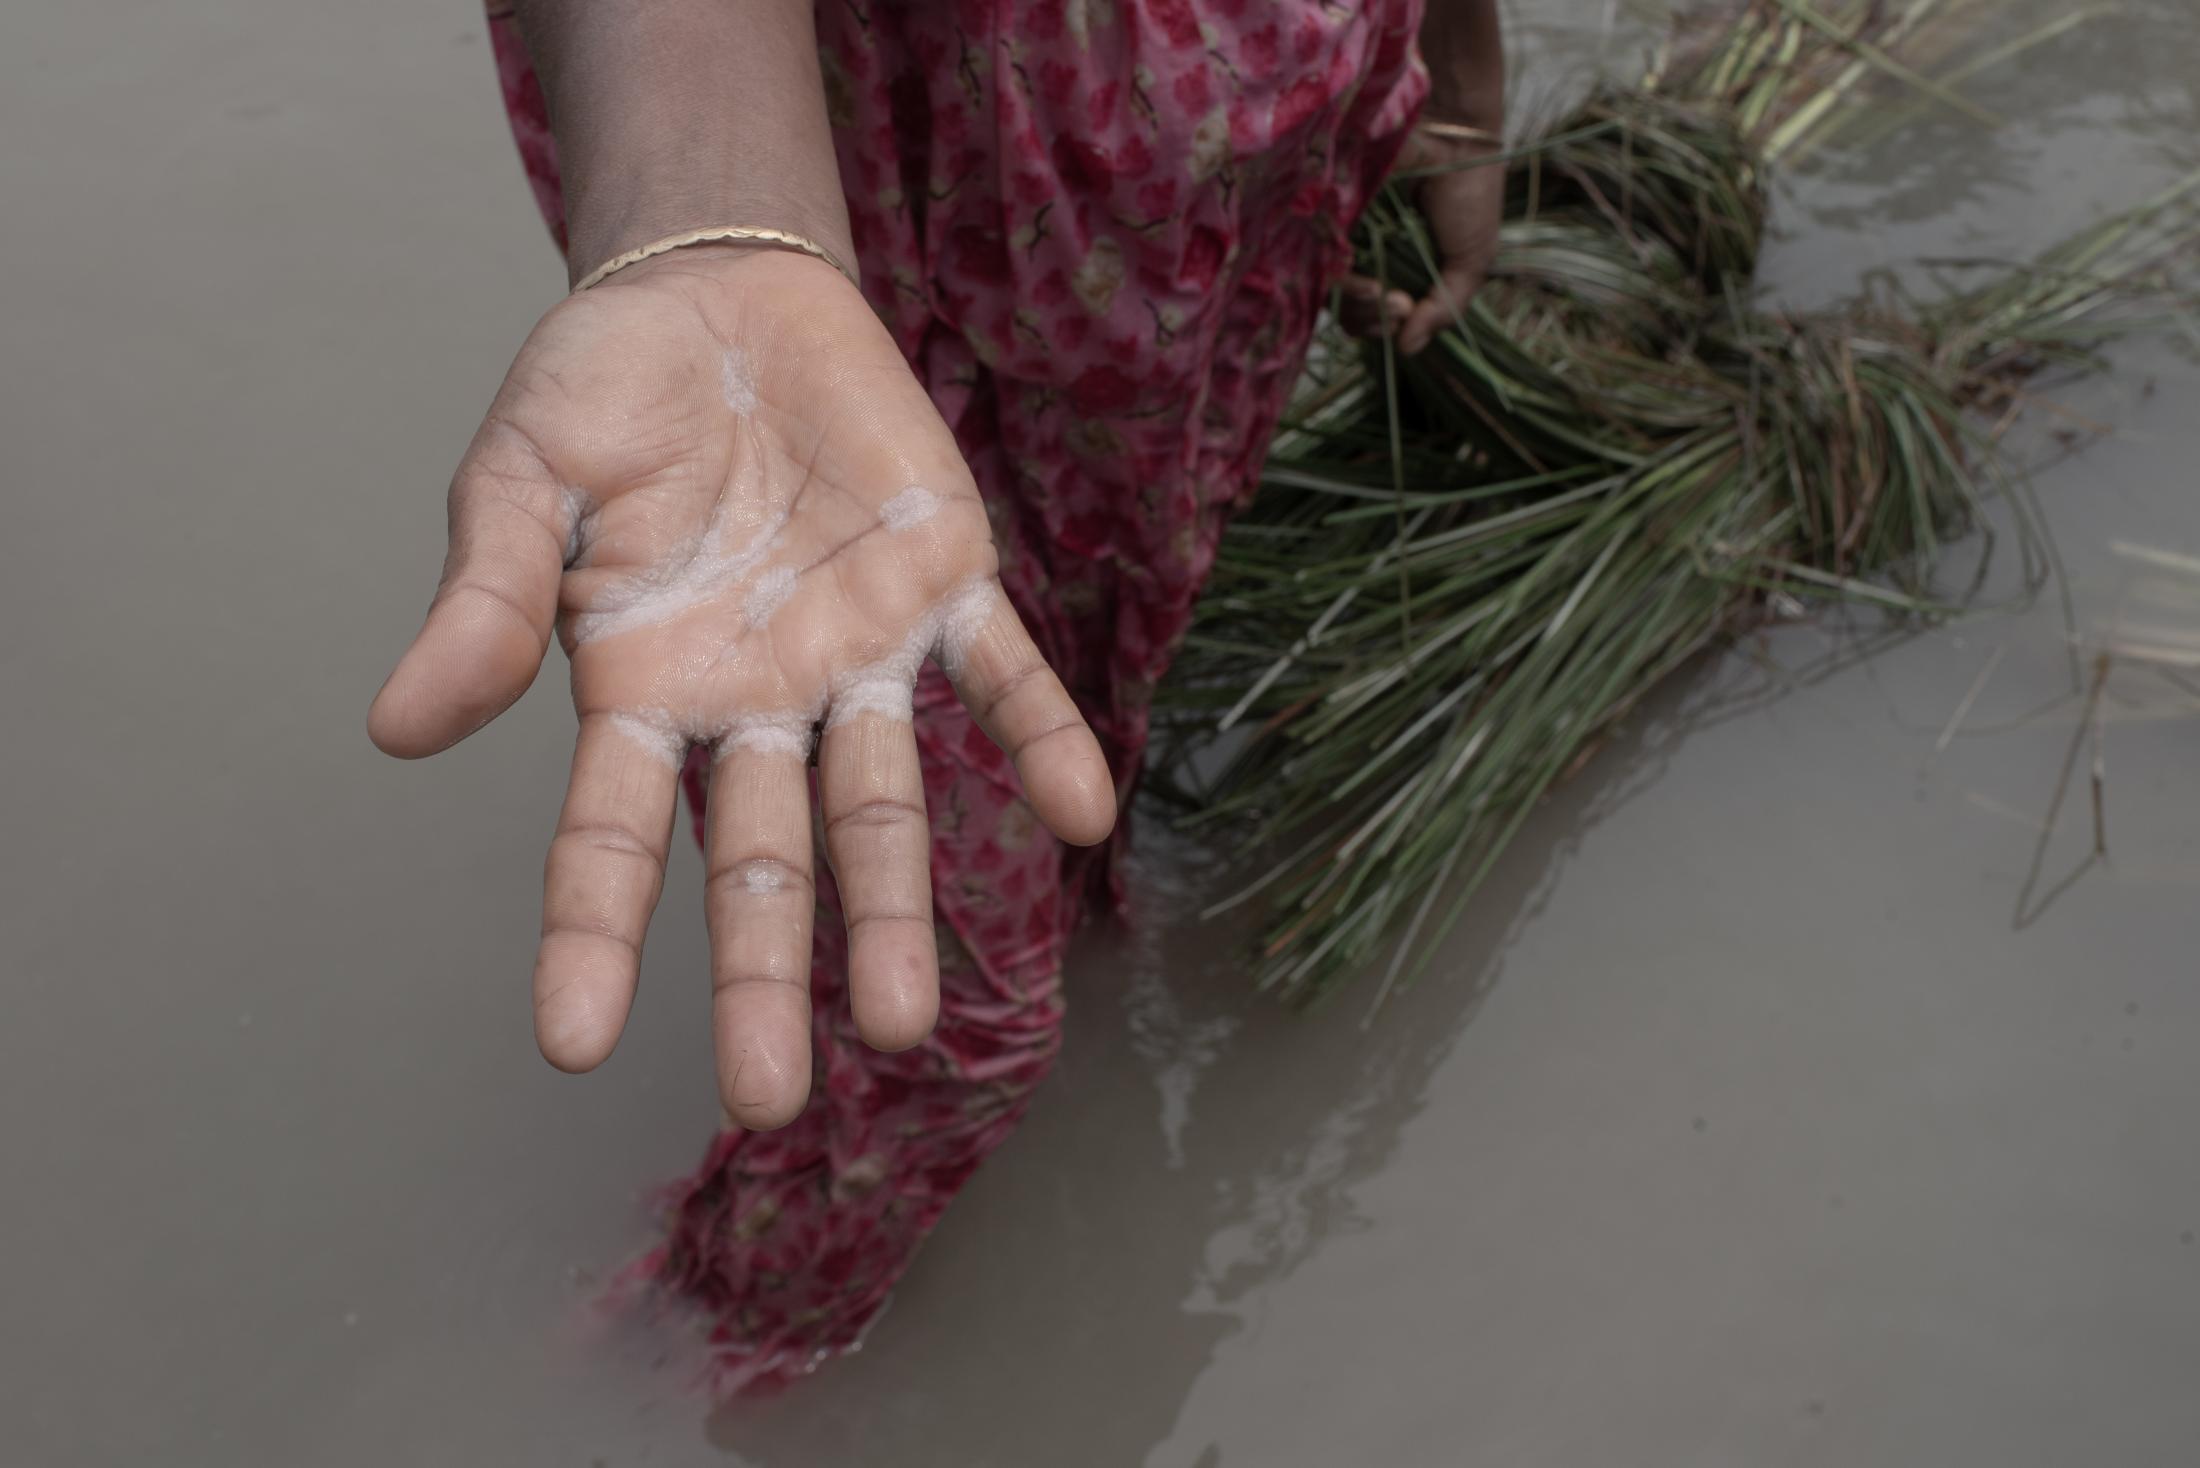 The Depth of Flood - A woman shows the palm of her hand which is infected by...